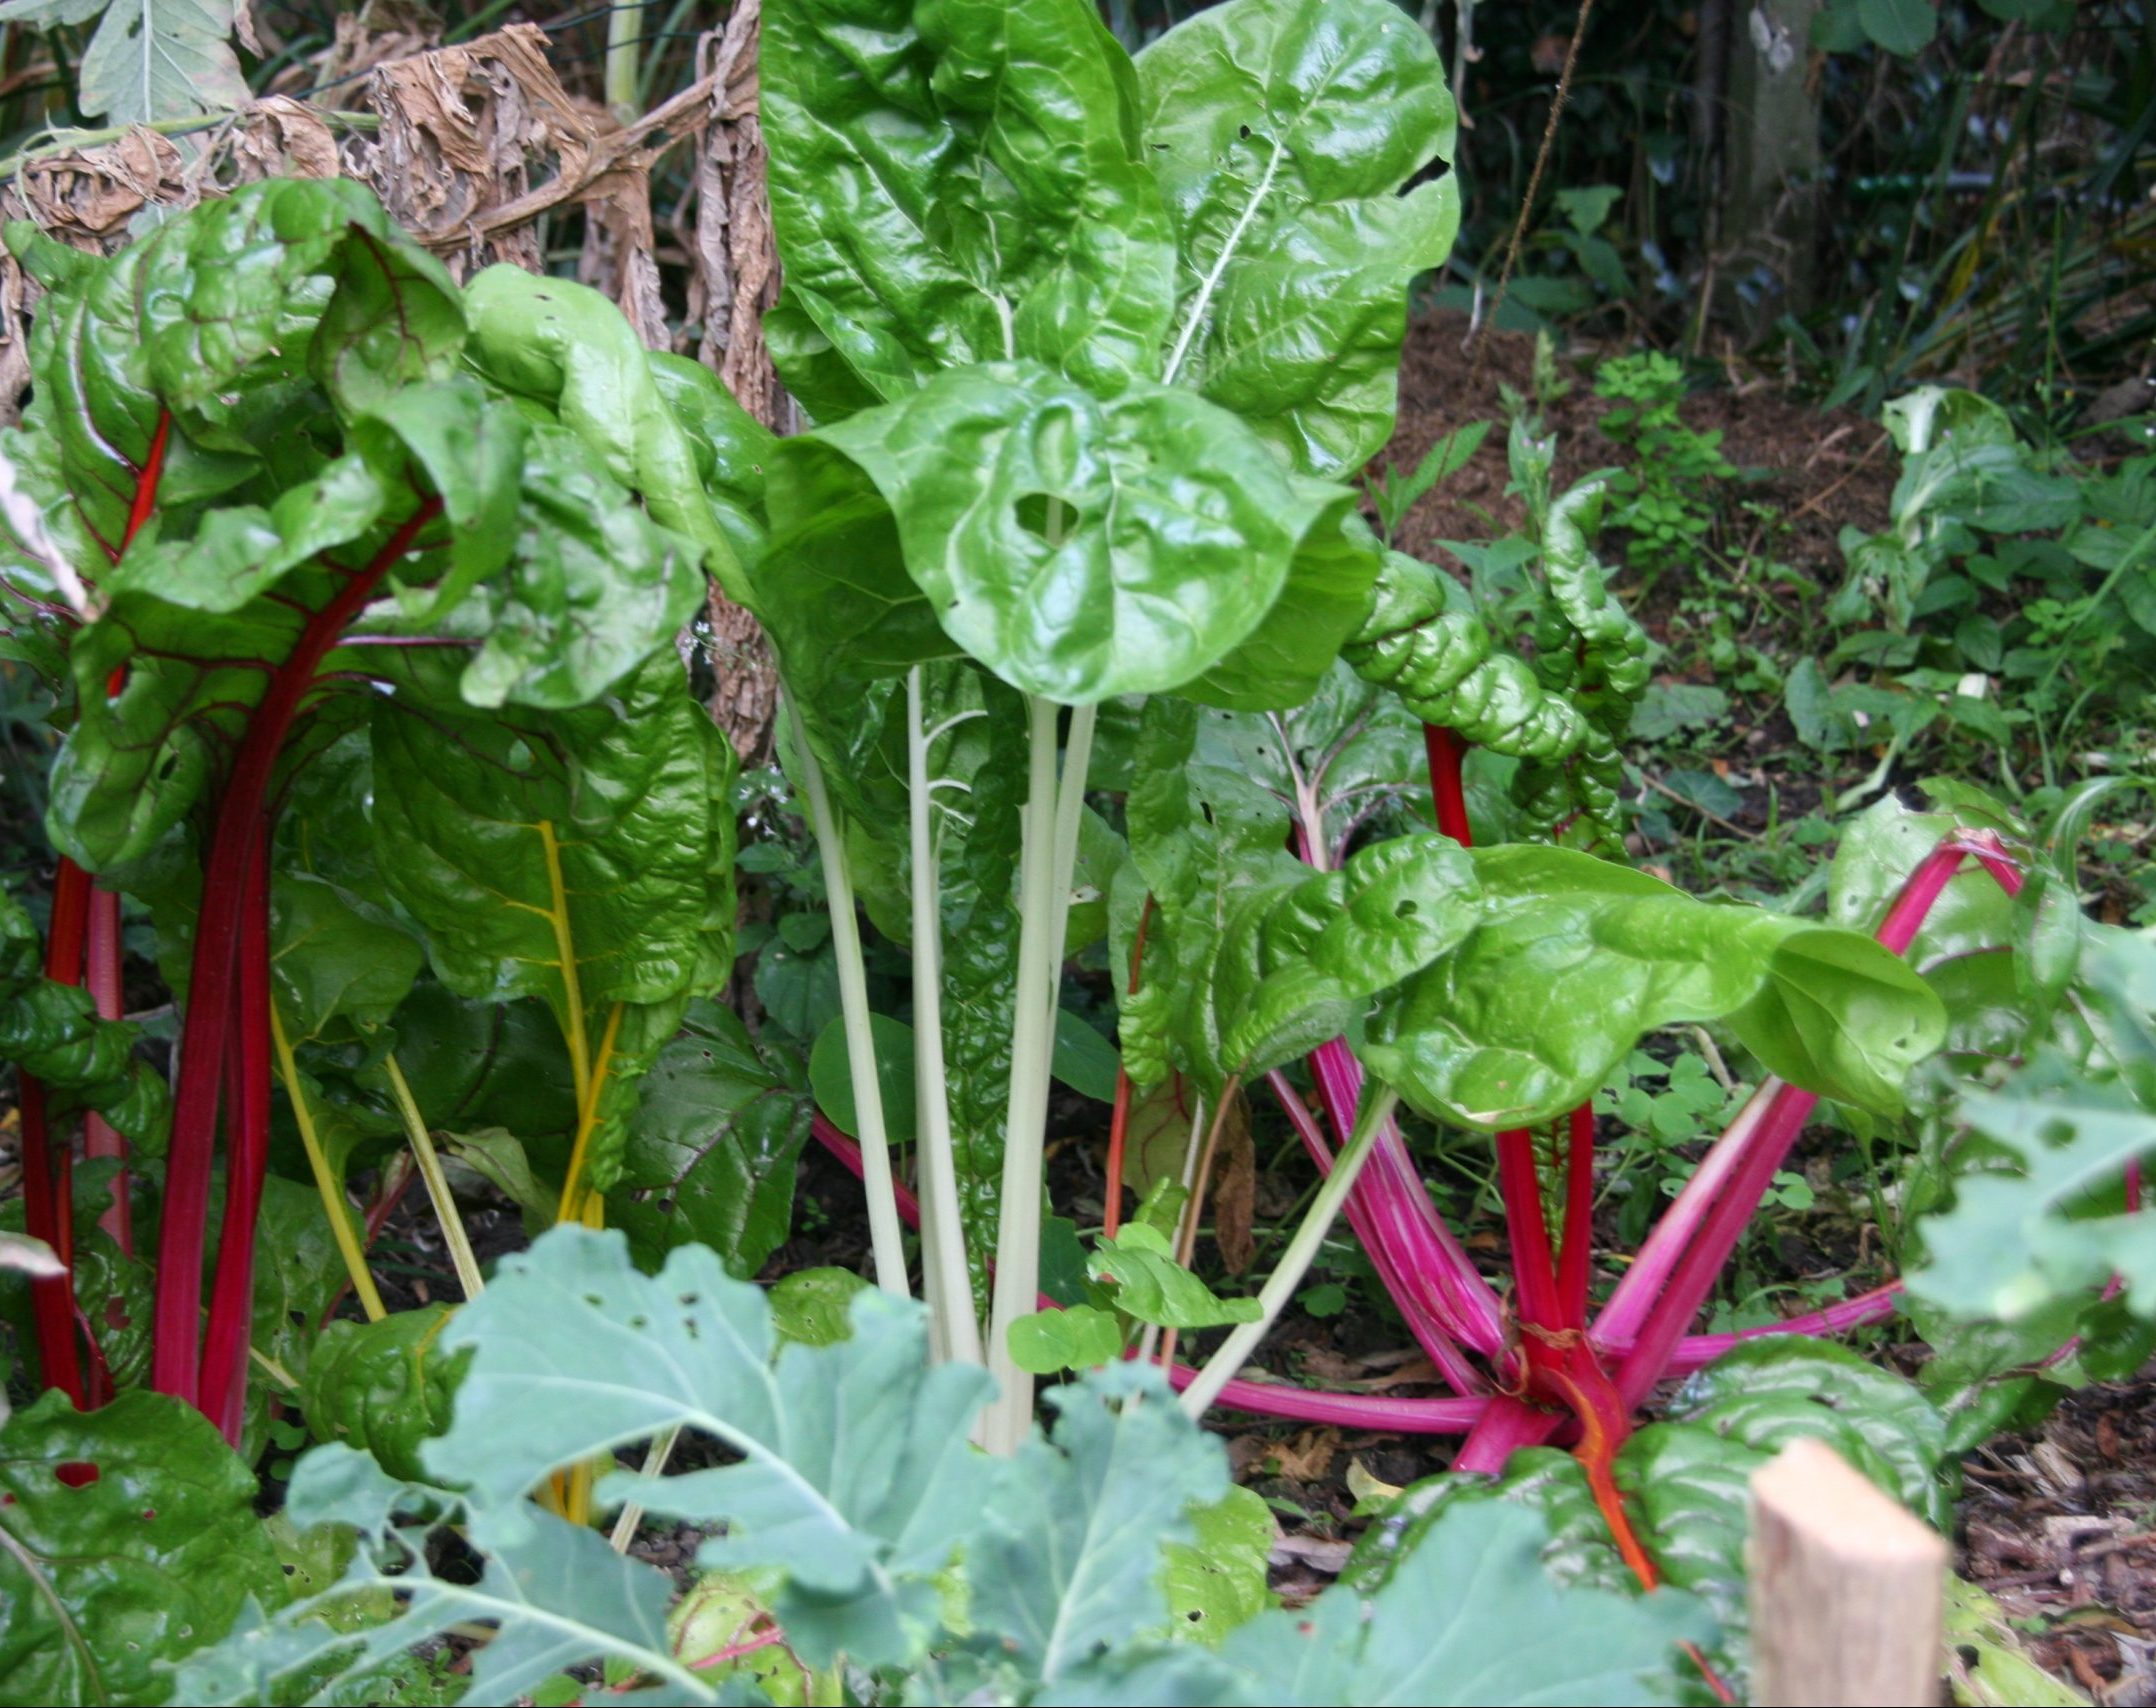 Swiss Chard, showing red, yellow and white stems